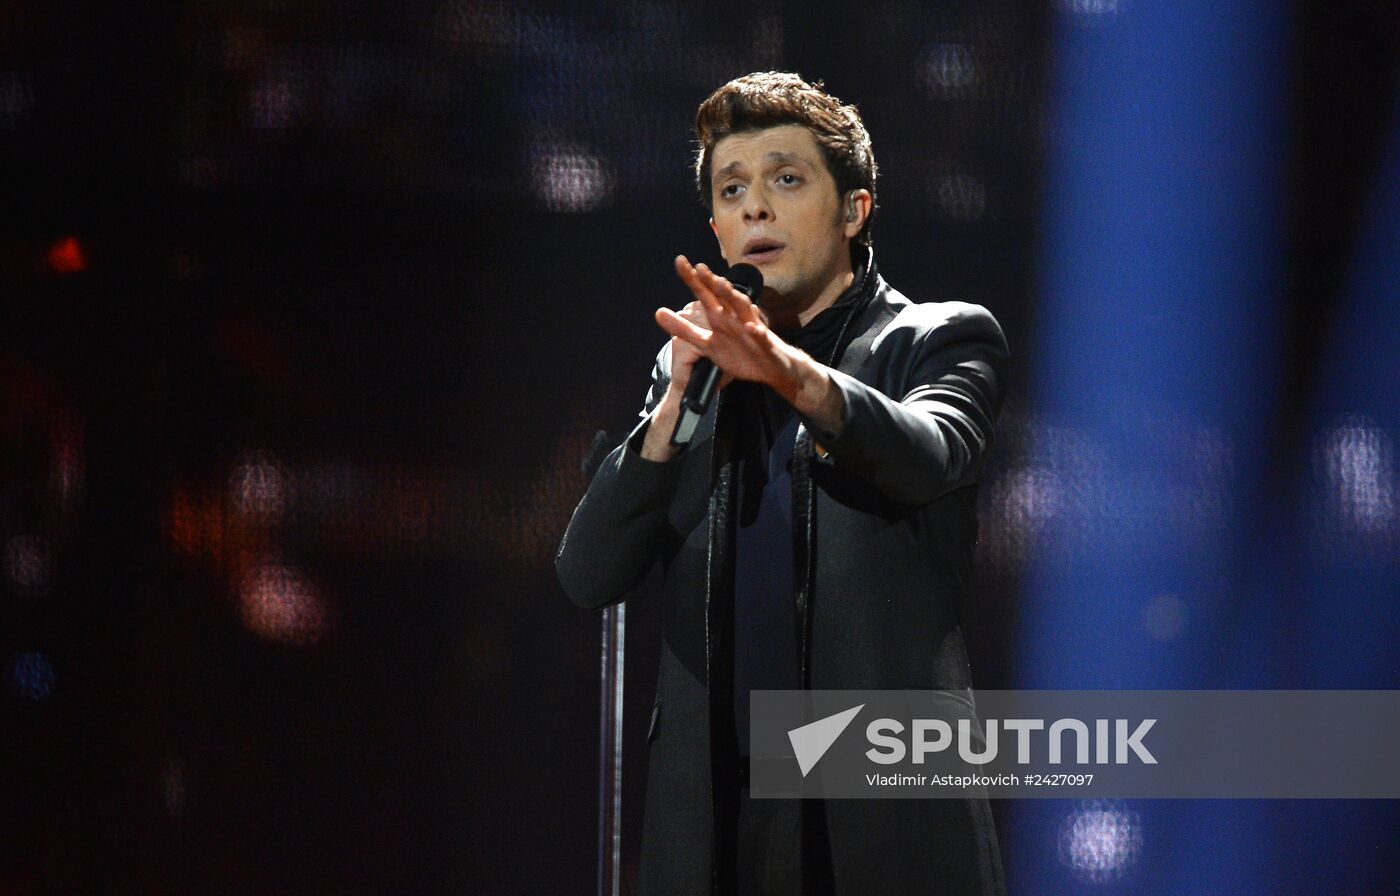 Finals of 2014 Eurovision Song Contest